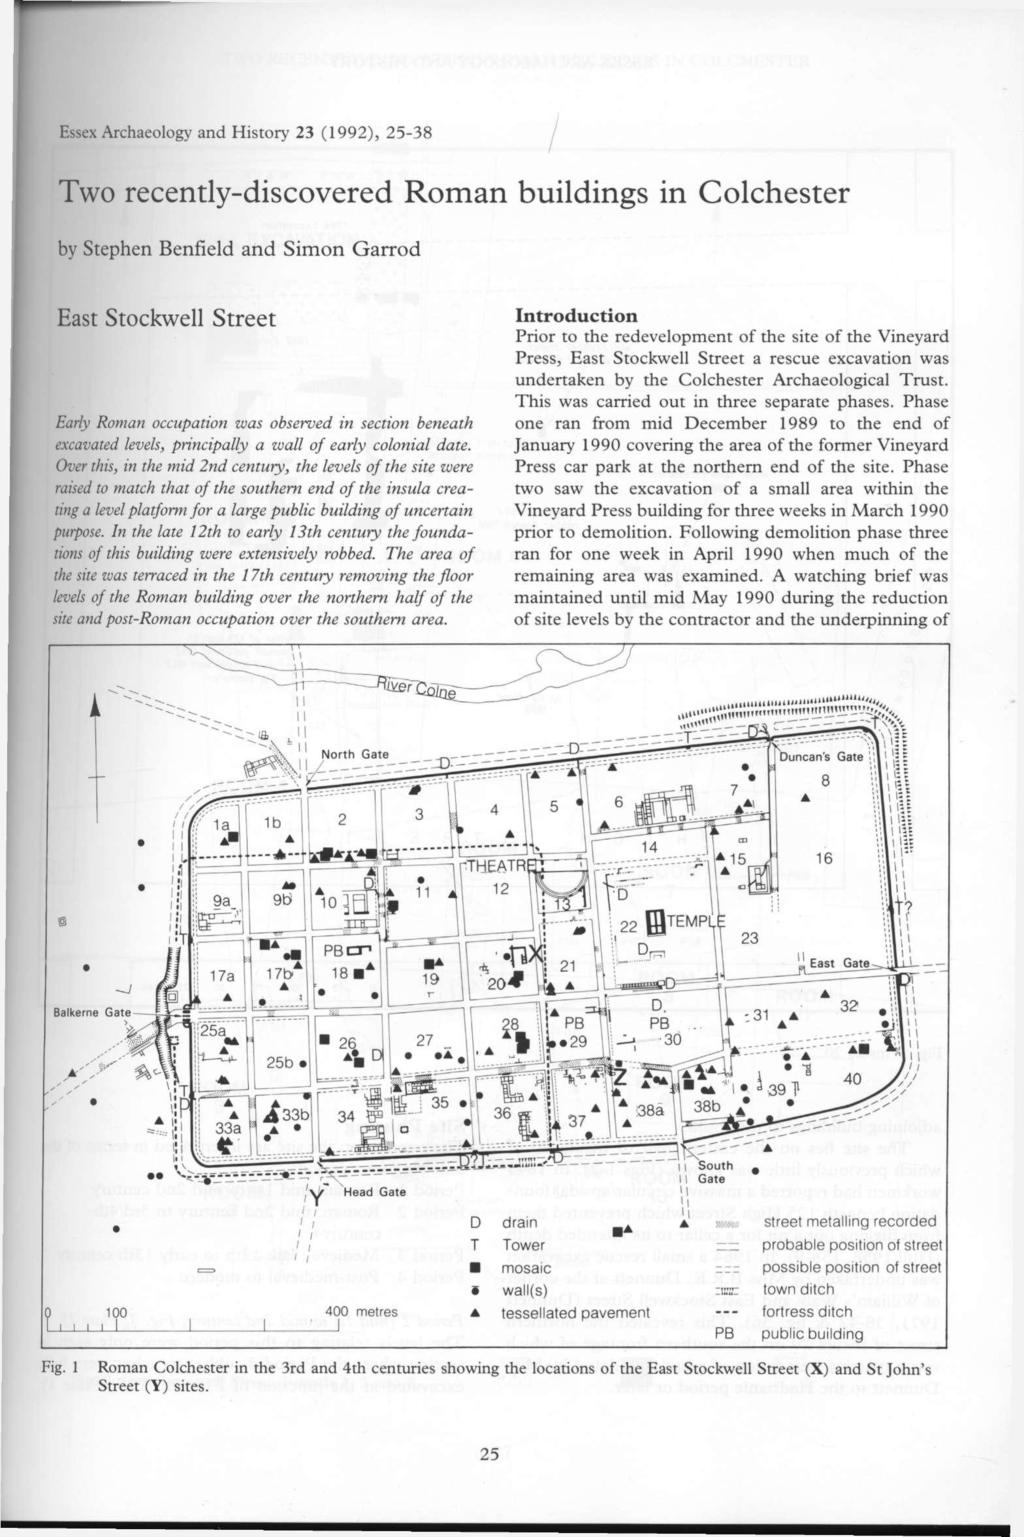 Essex Archaeology and History 23 (1992), 25-38 Two recently-discovered Roman buildings in Colchester by Stephen Benfield and Simon Garrod East Stockwell Street Early Roman occupation was observed in